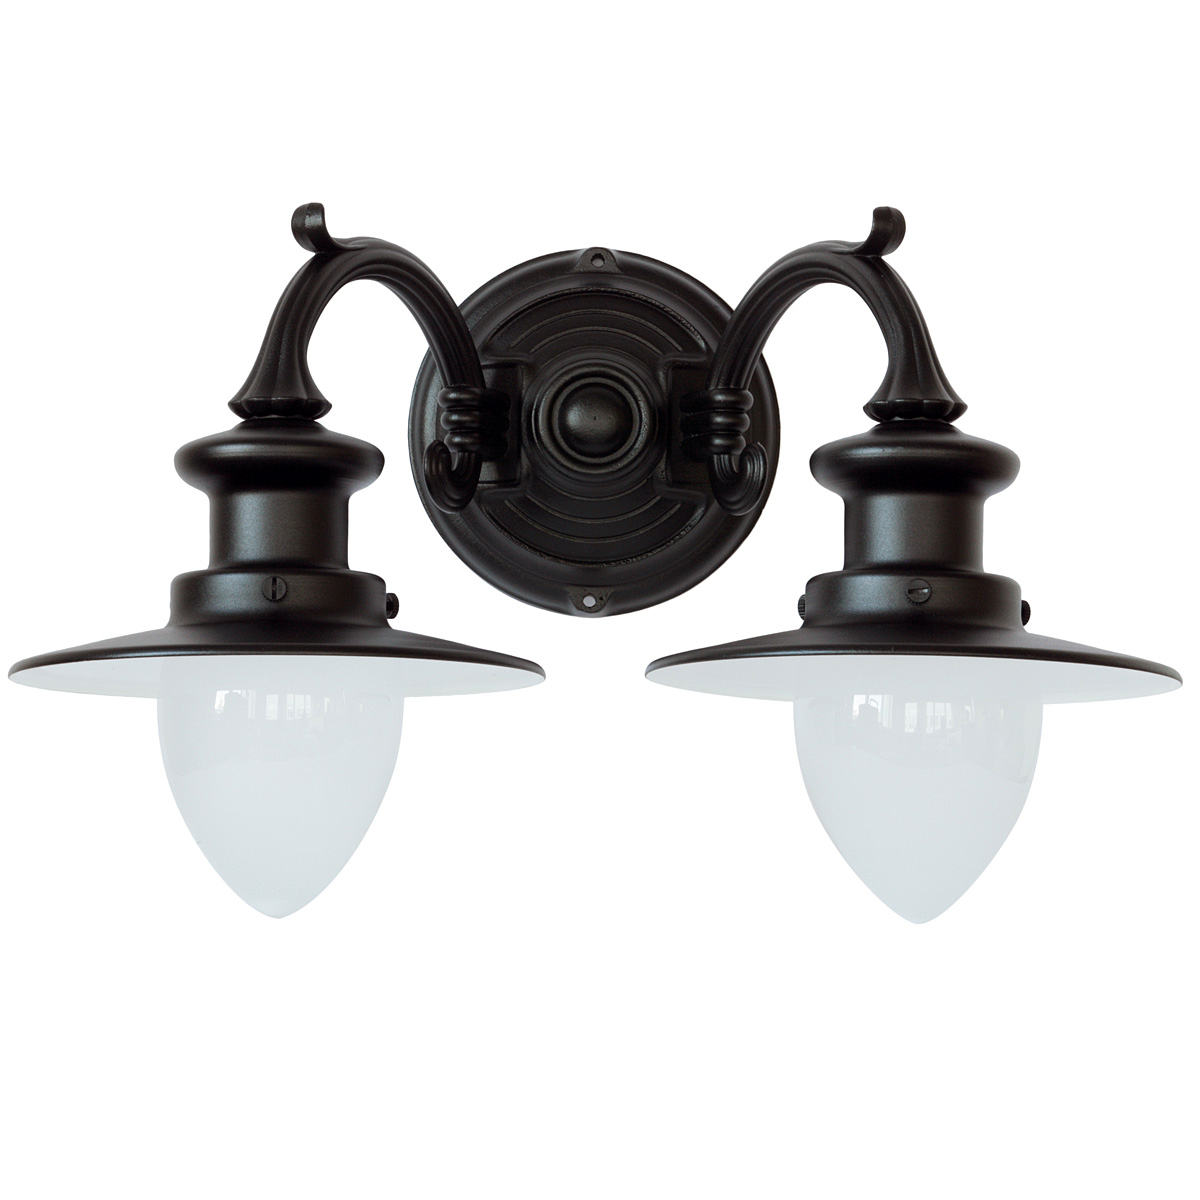 Double Bulb Wall Mount Lamp for Outdoors with Pointed Glass Cylinders